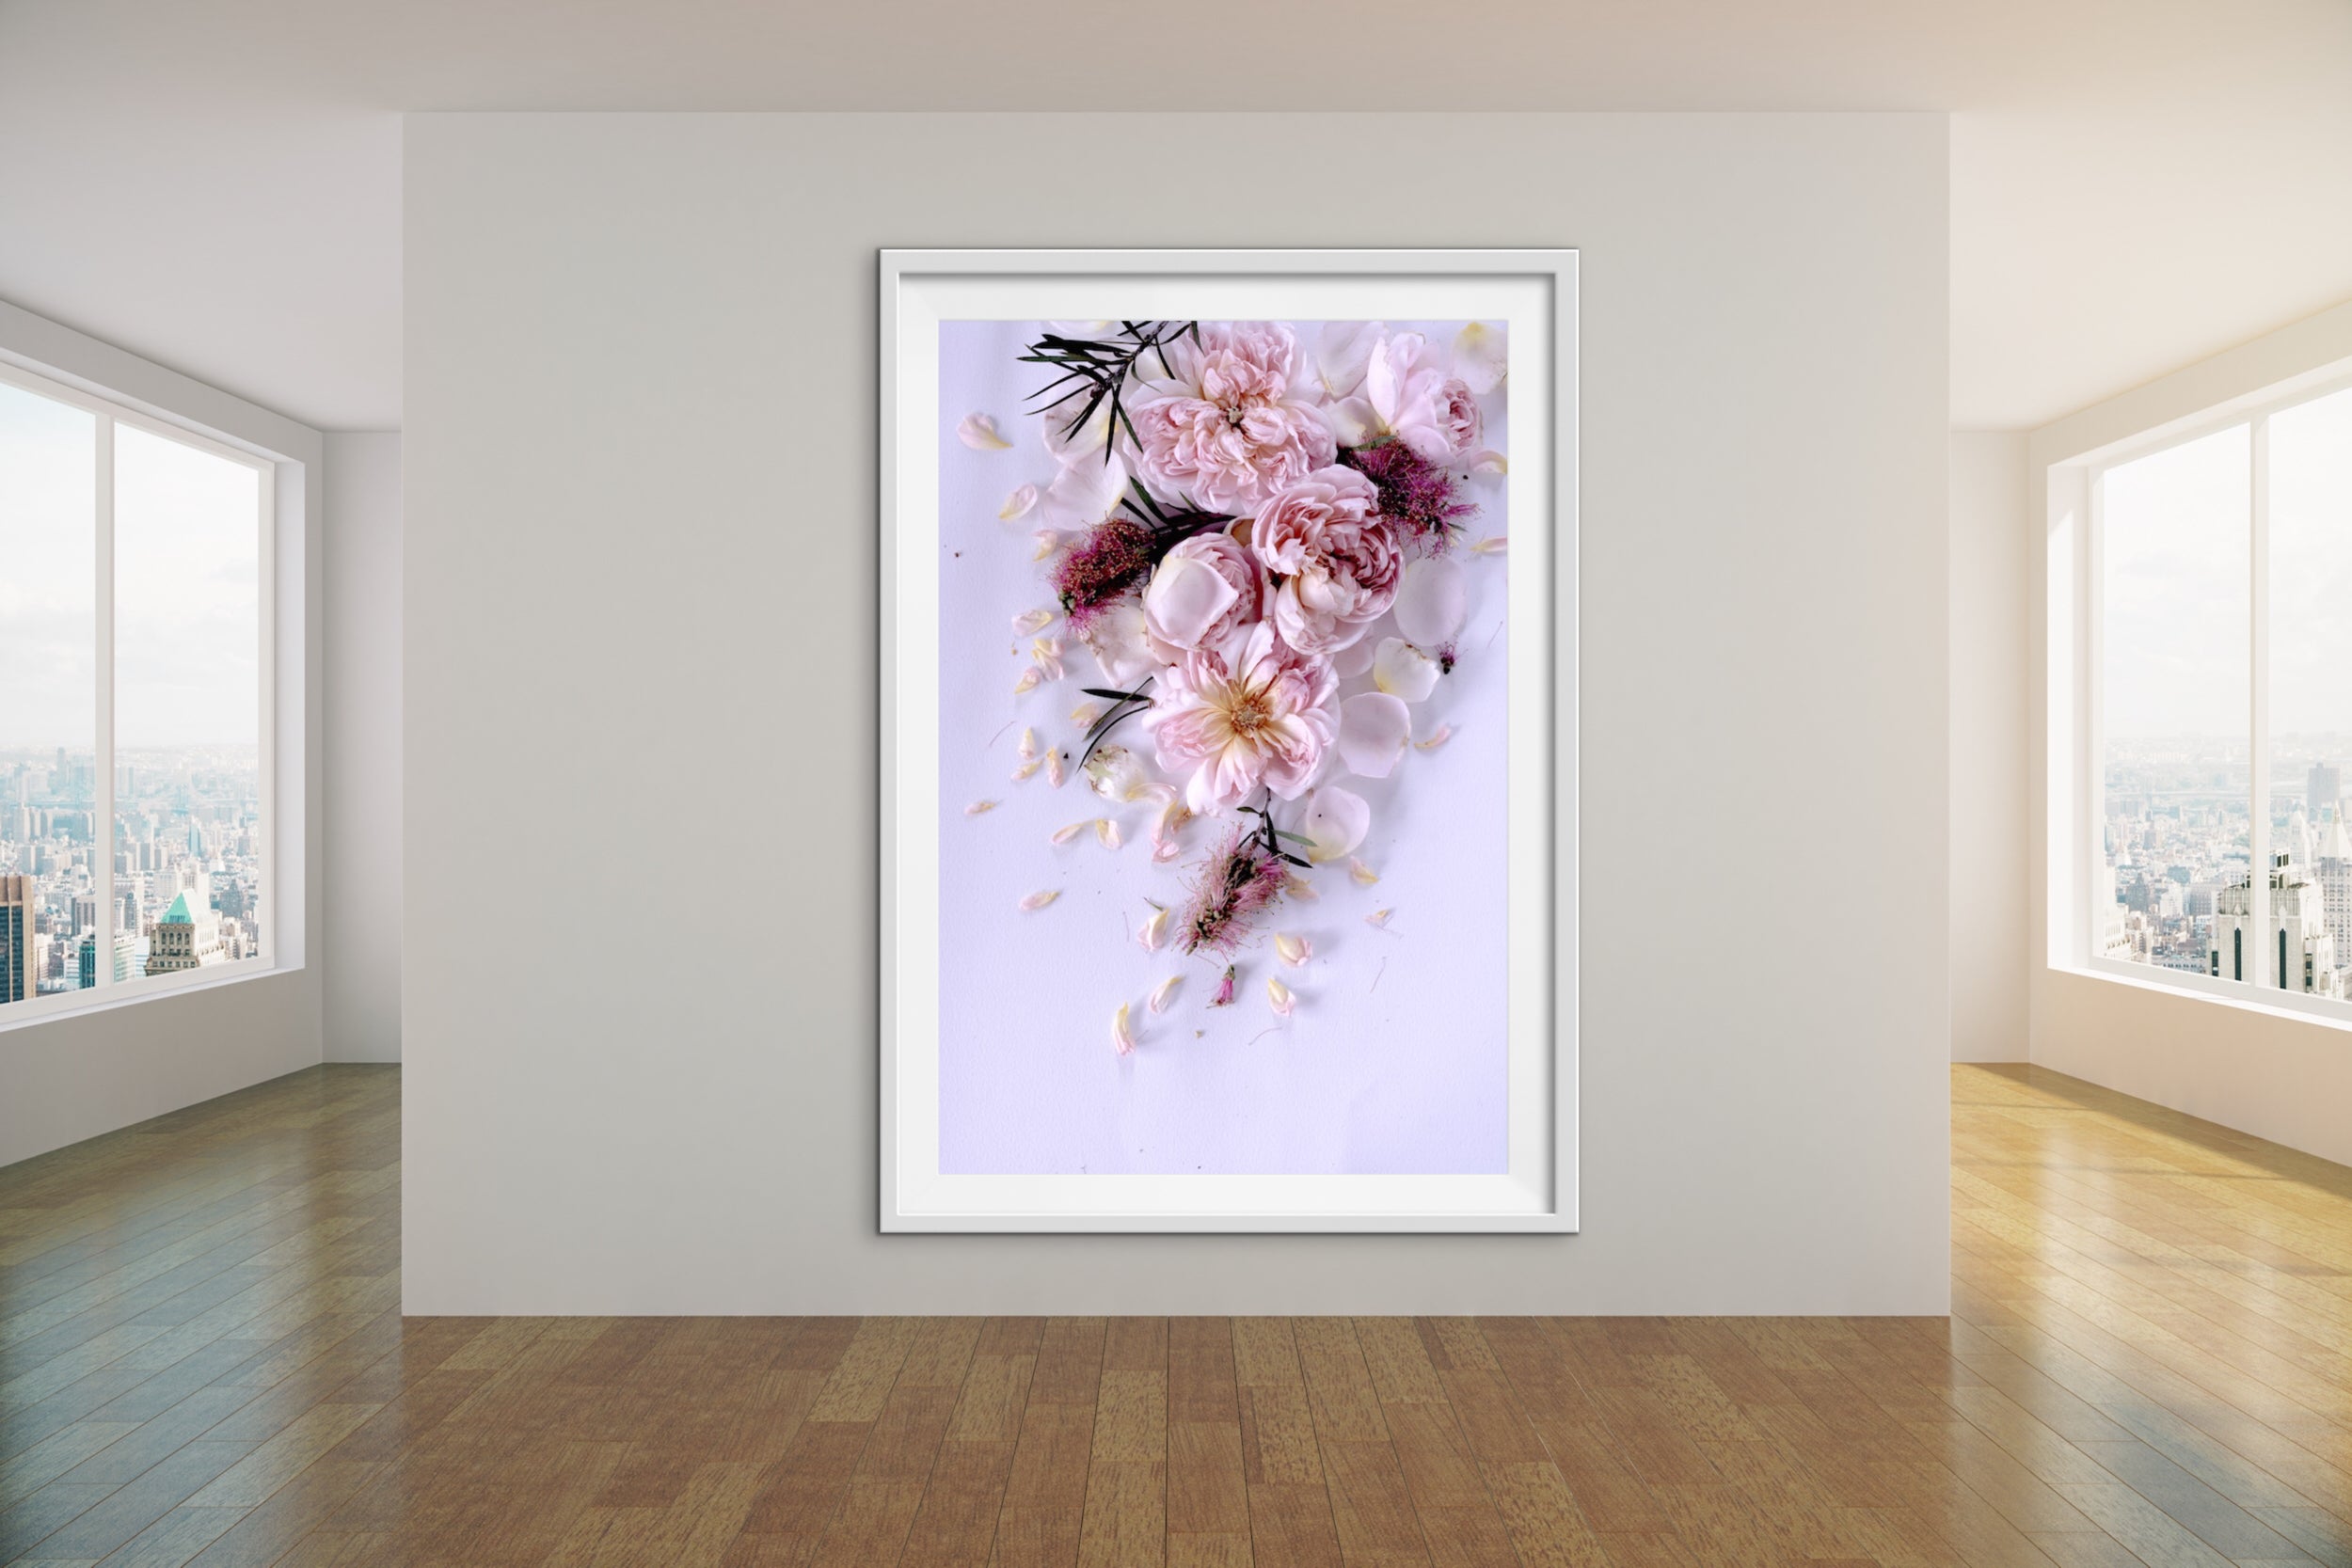 Abstract Floral. Purple. Flower Power Serenade. Art Print. Antuanelle 4 Soft Pastel Floral Artwork. Limited Edition Print